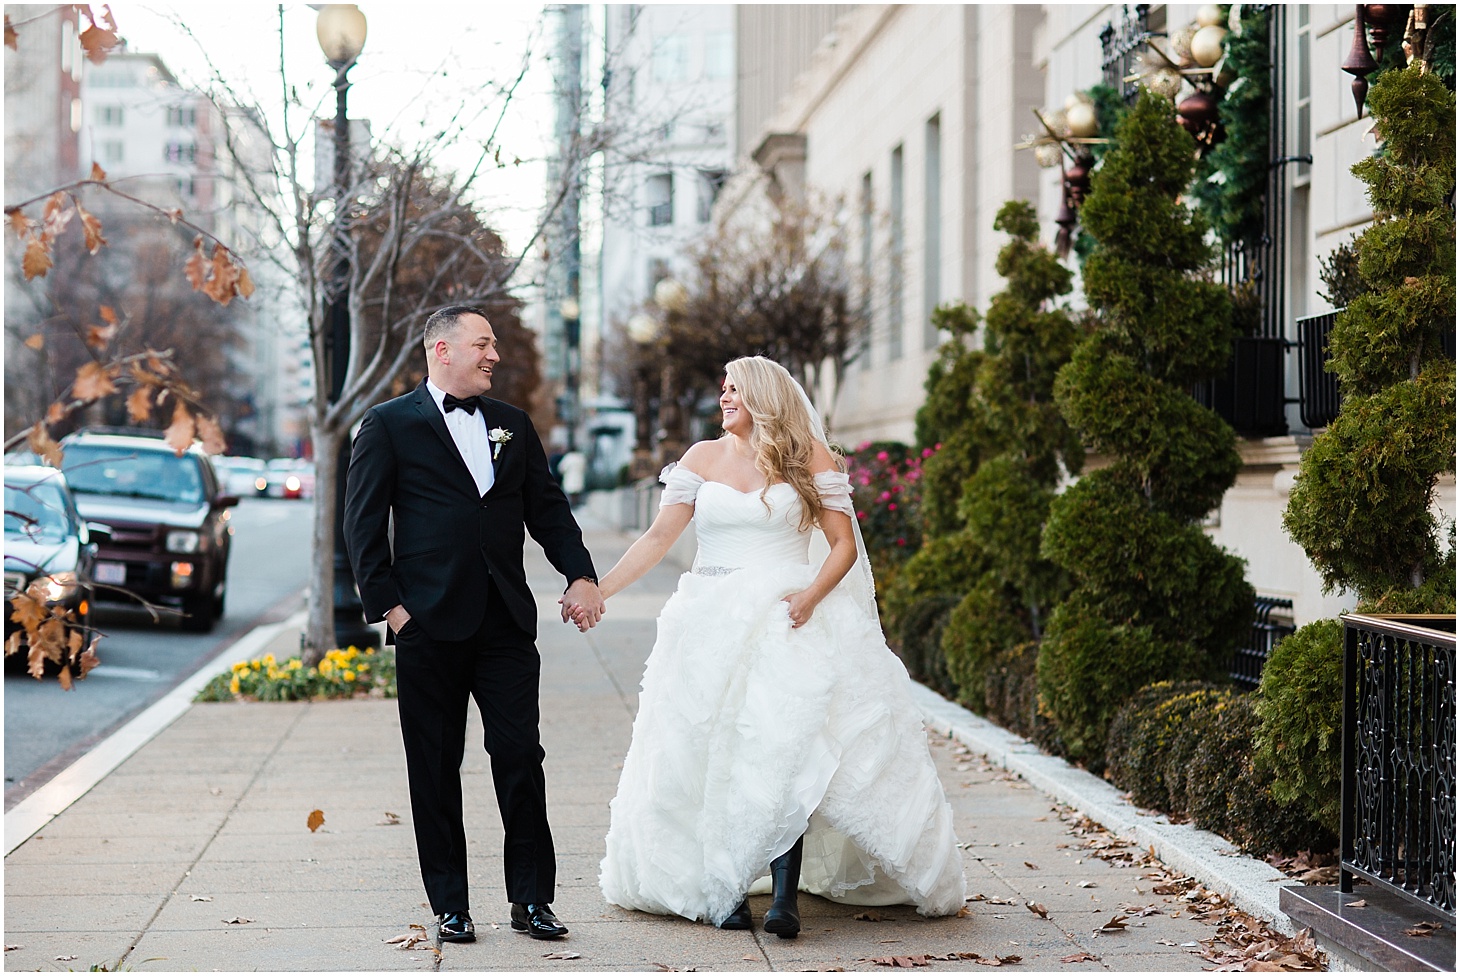 Wedding Portraits at the Army and Navy Club | Luxe Winter Wedding in Washington, DC | Sarah Bradshaw Photography | Washington DC Wedding Photographer